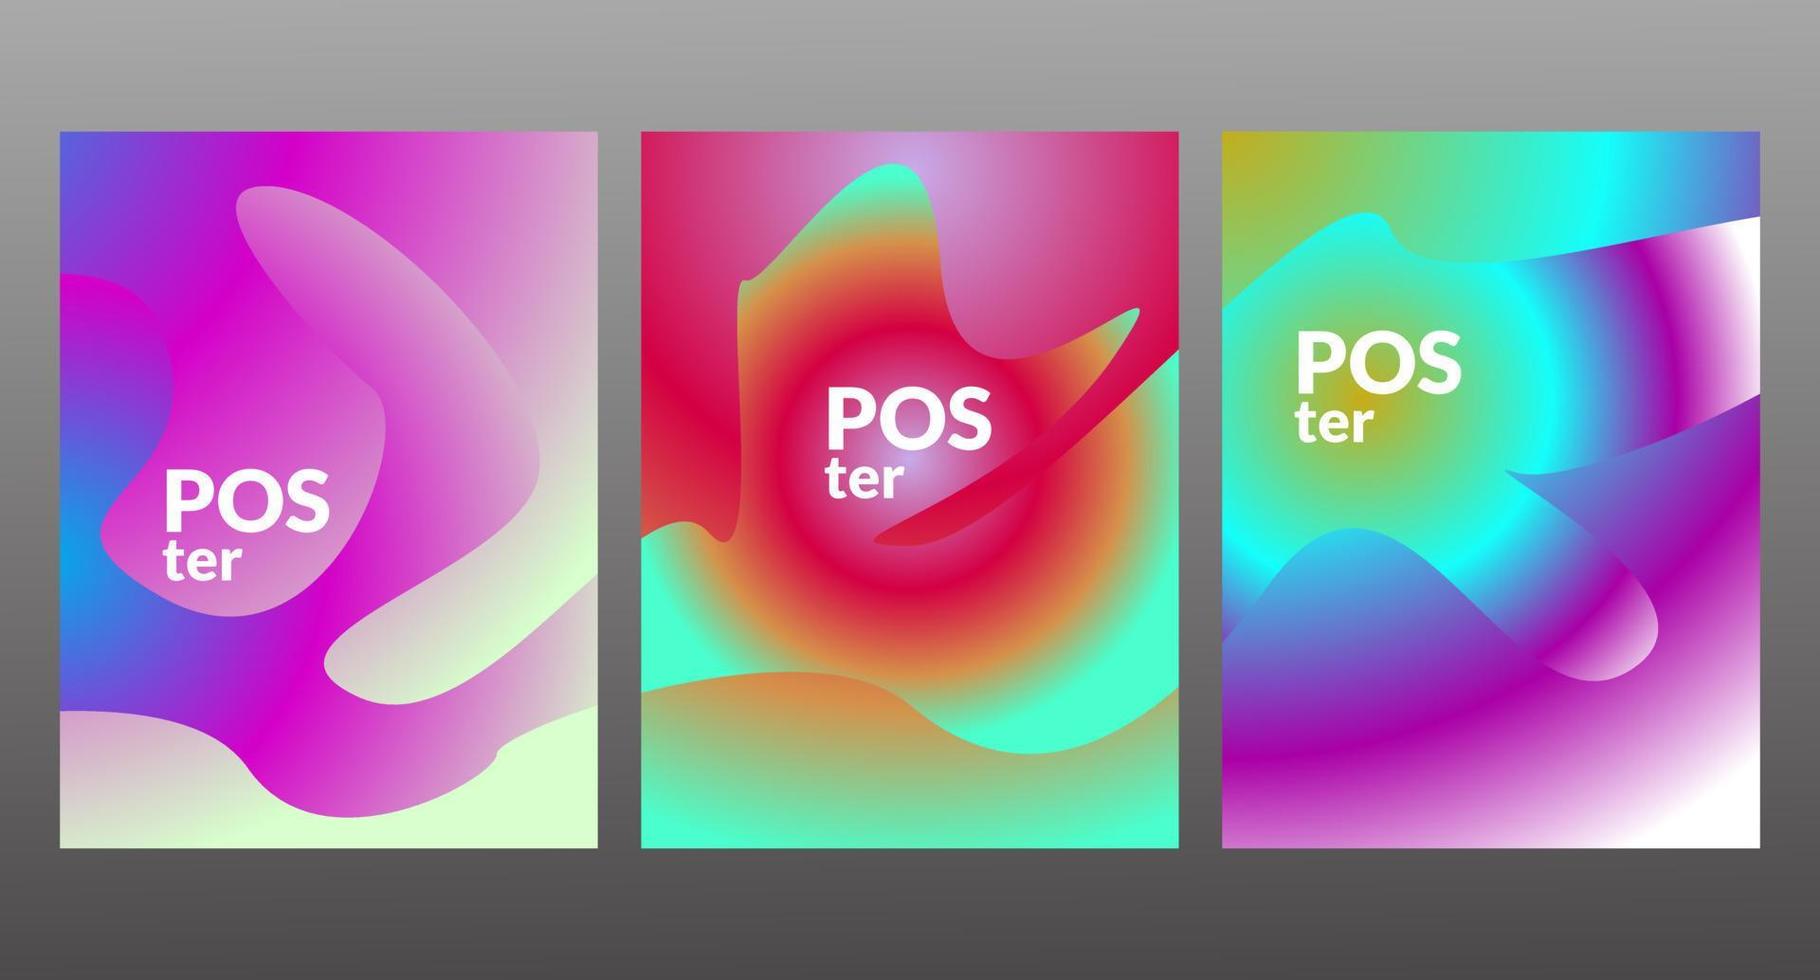 Vector colorful abstract fluid poster and banner template